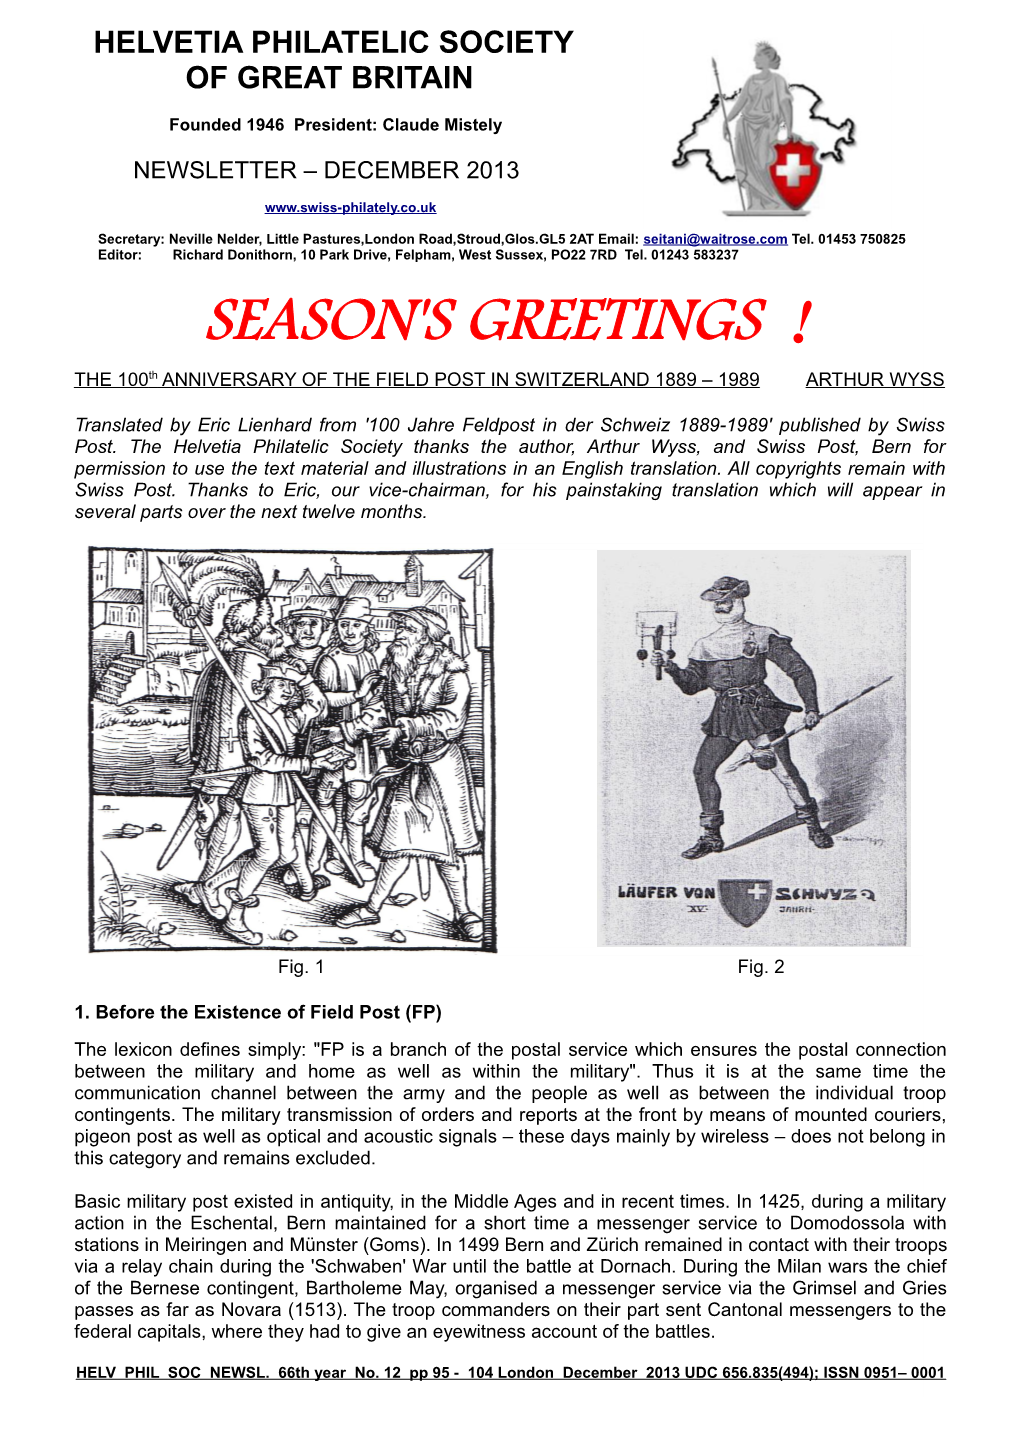 SEASON's GREETINGS ! the 100 Th ANNIVERSARY of the FIELD POST in SWITZERLAND 1889 – 1989 ARTHUR WYSS